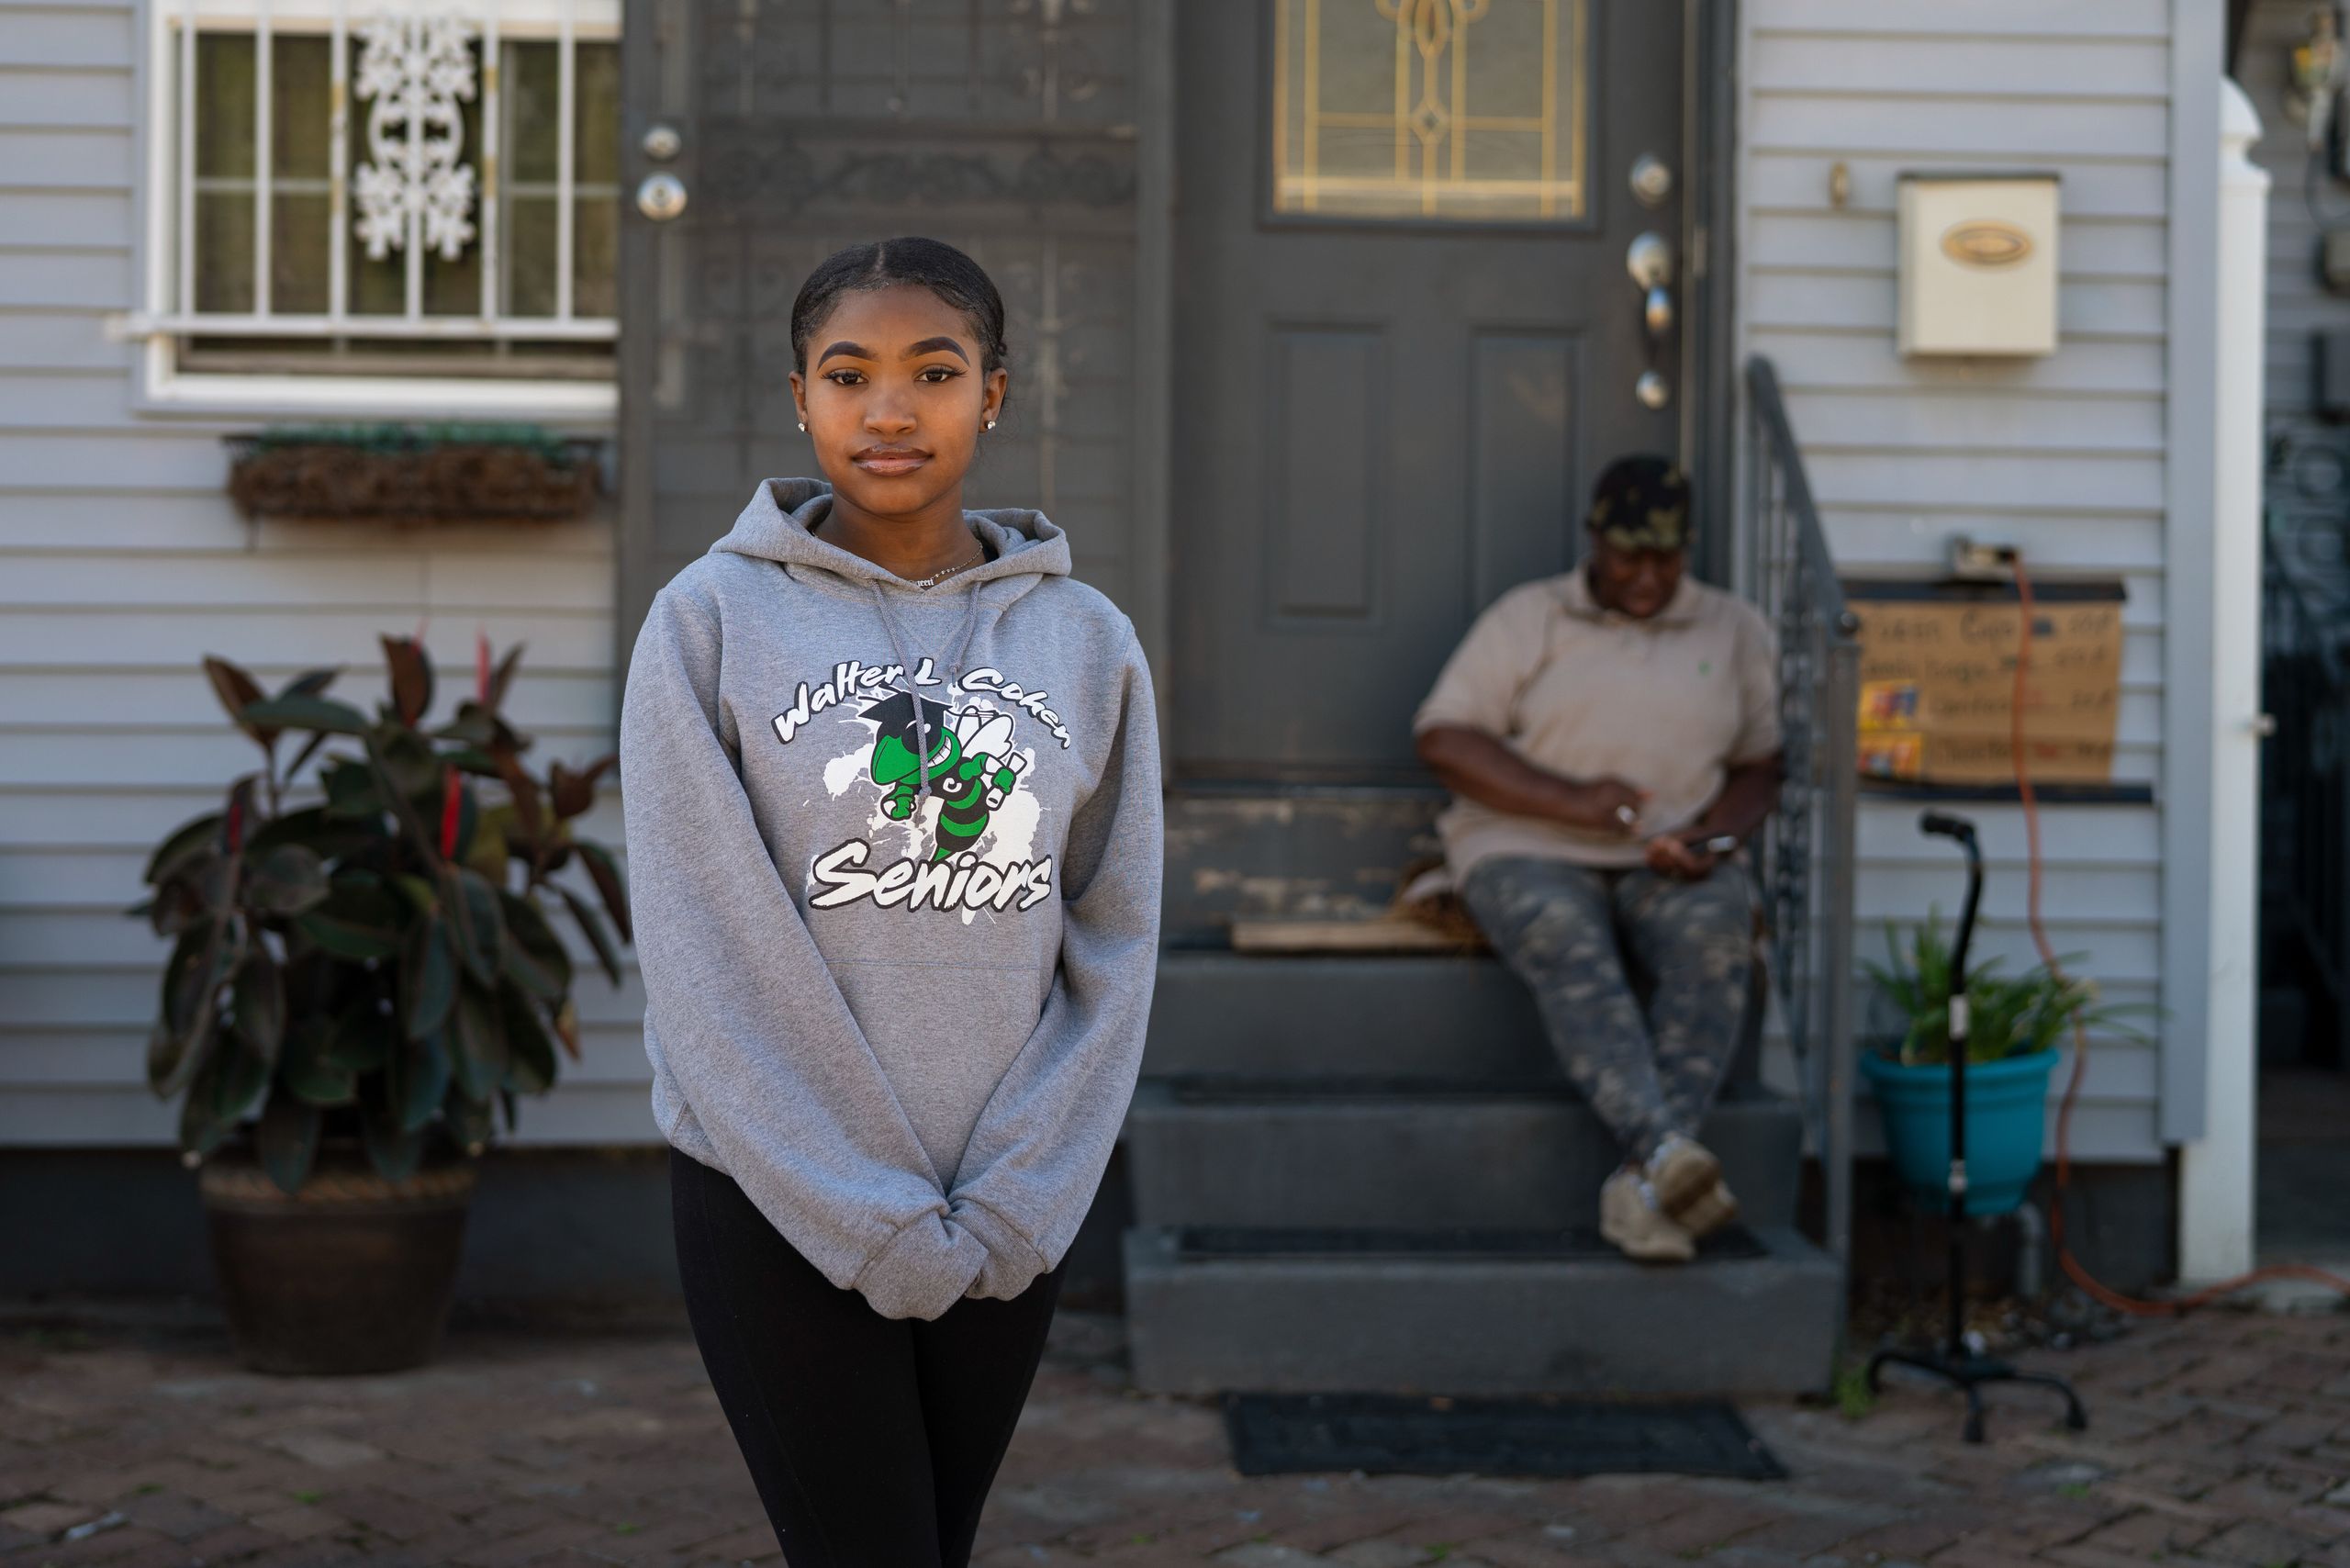 Satoriya Lambert stands in front of her home where she lives with her grandmother, Ether Bullock, 70, a retired teacher, who 